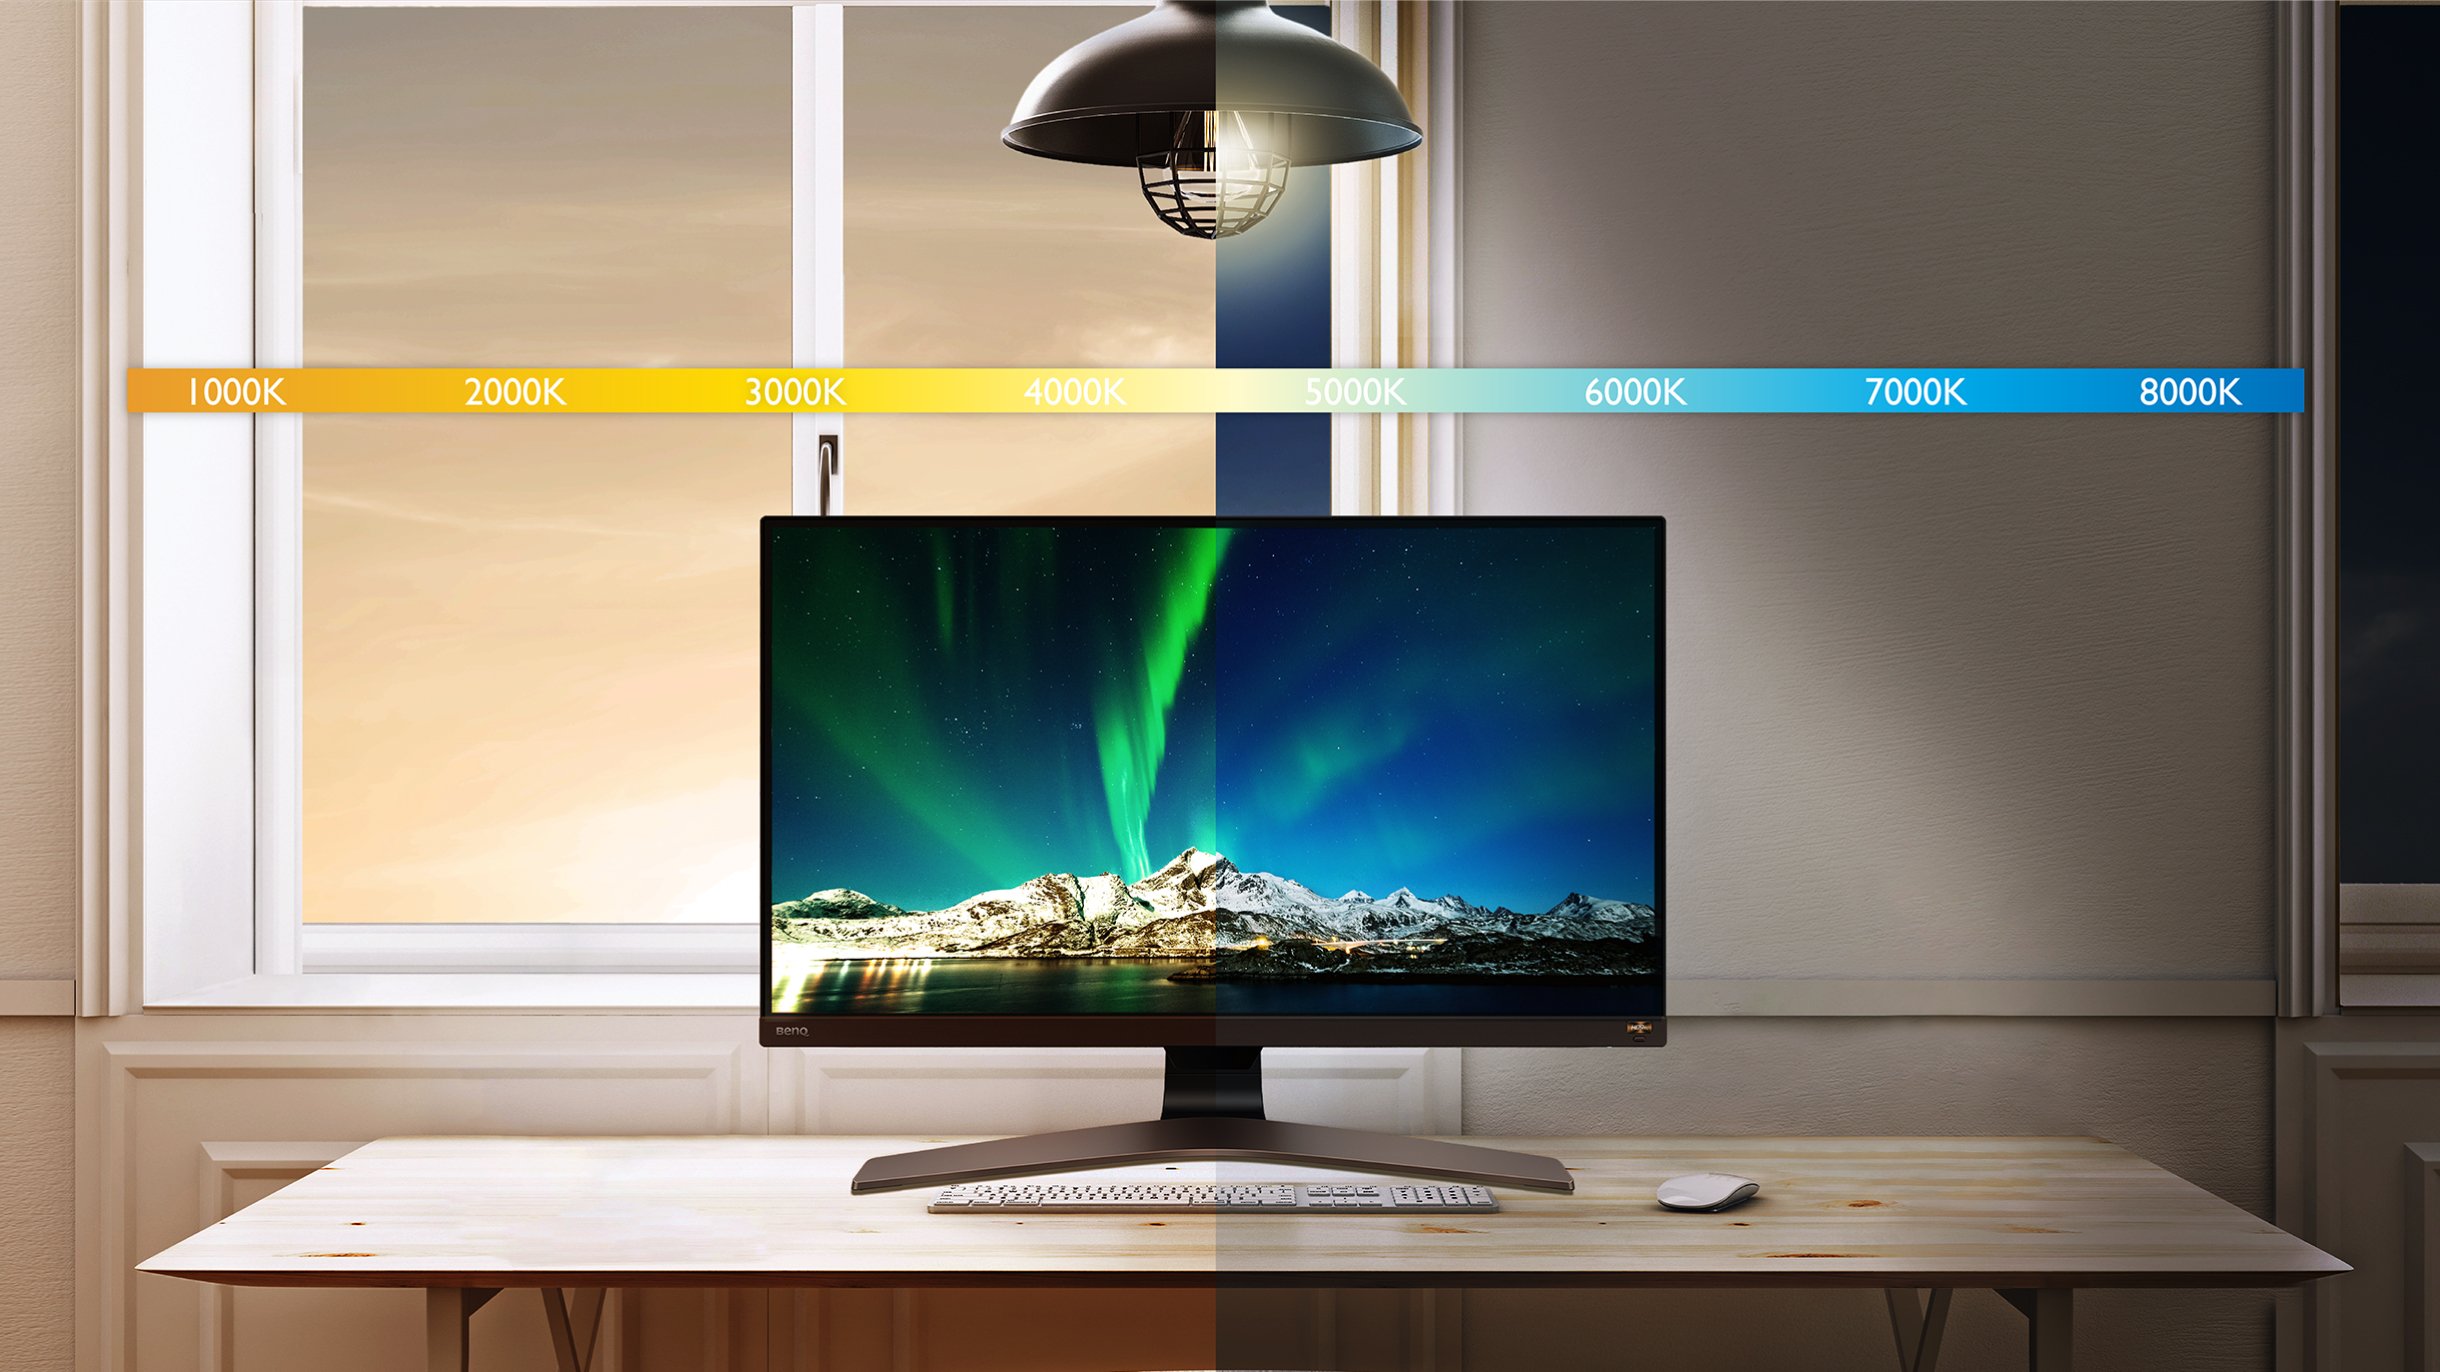 Brightness Intelligence Plus adjusts display brightness and color temperature for your most comfortable viewing experience